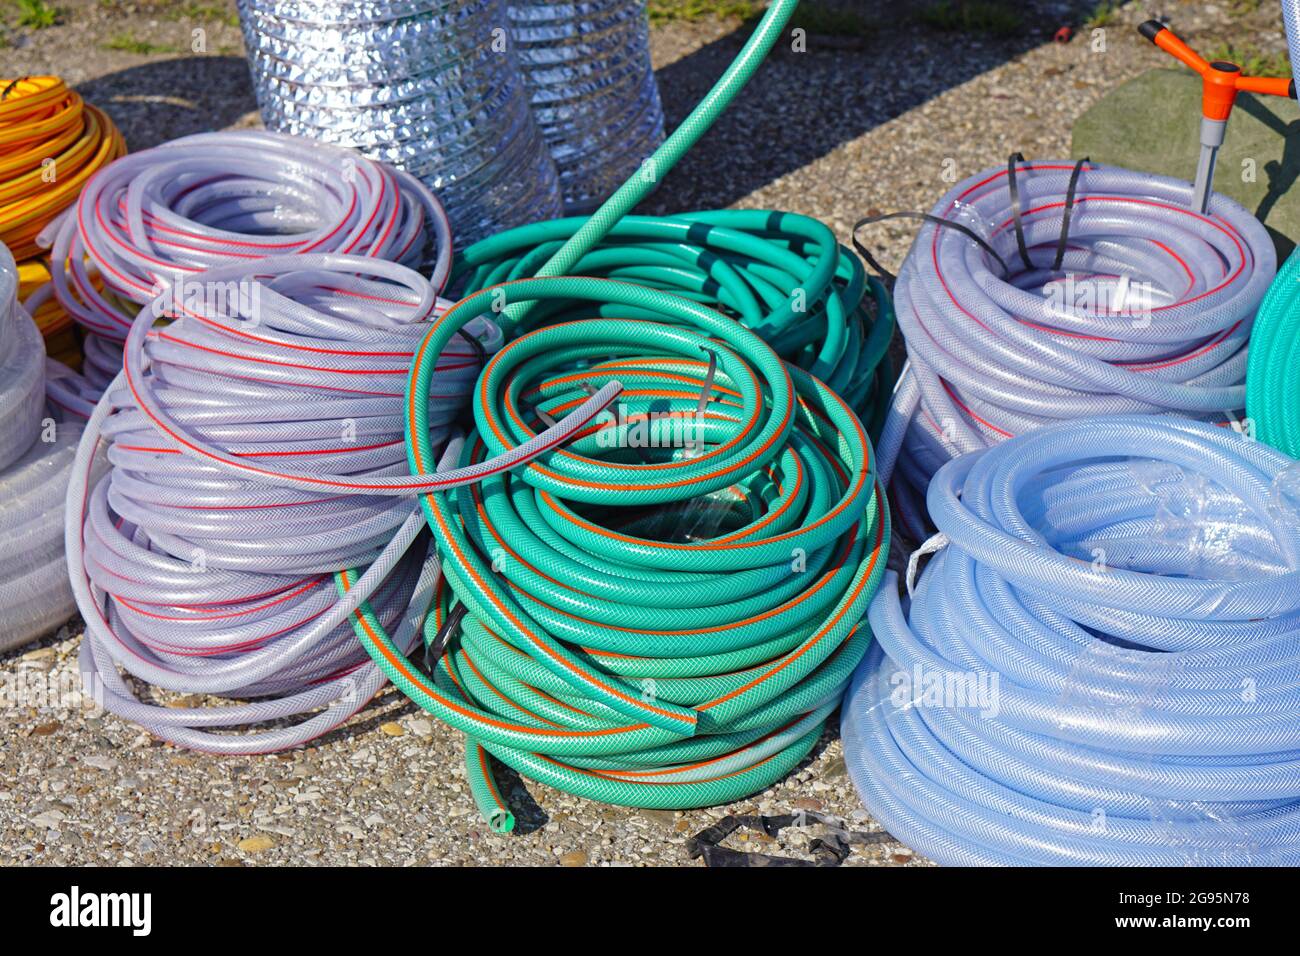 Many plastic and rubber garden water hose tube Stock Photo